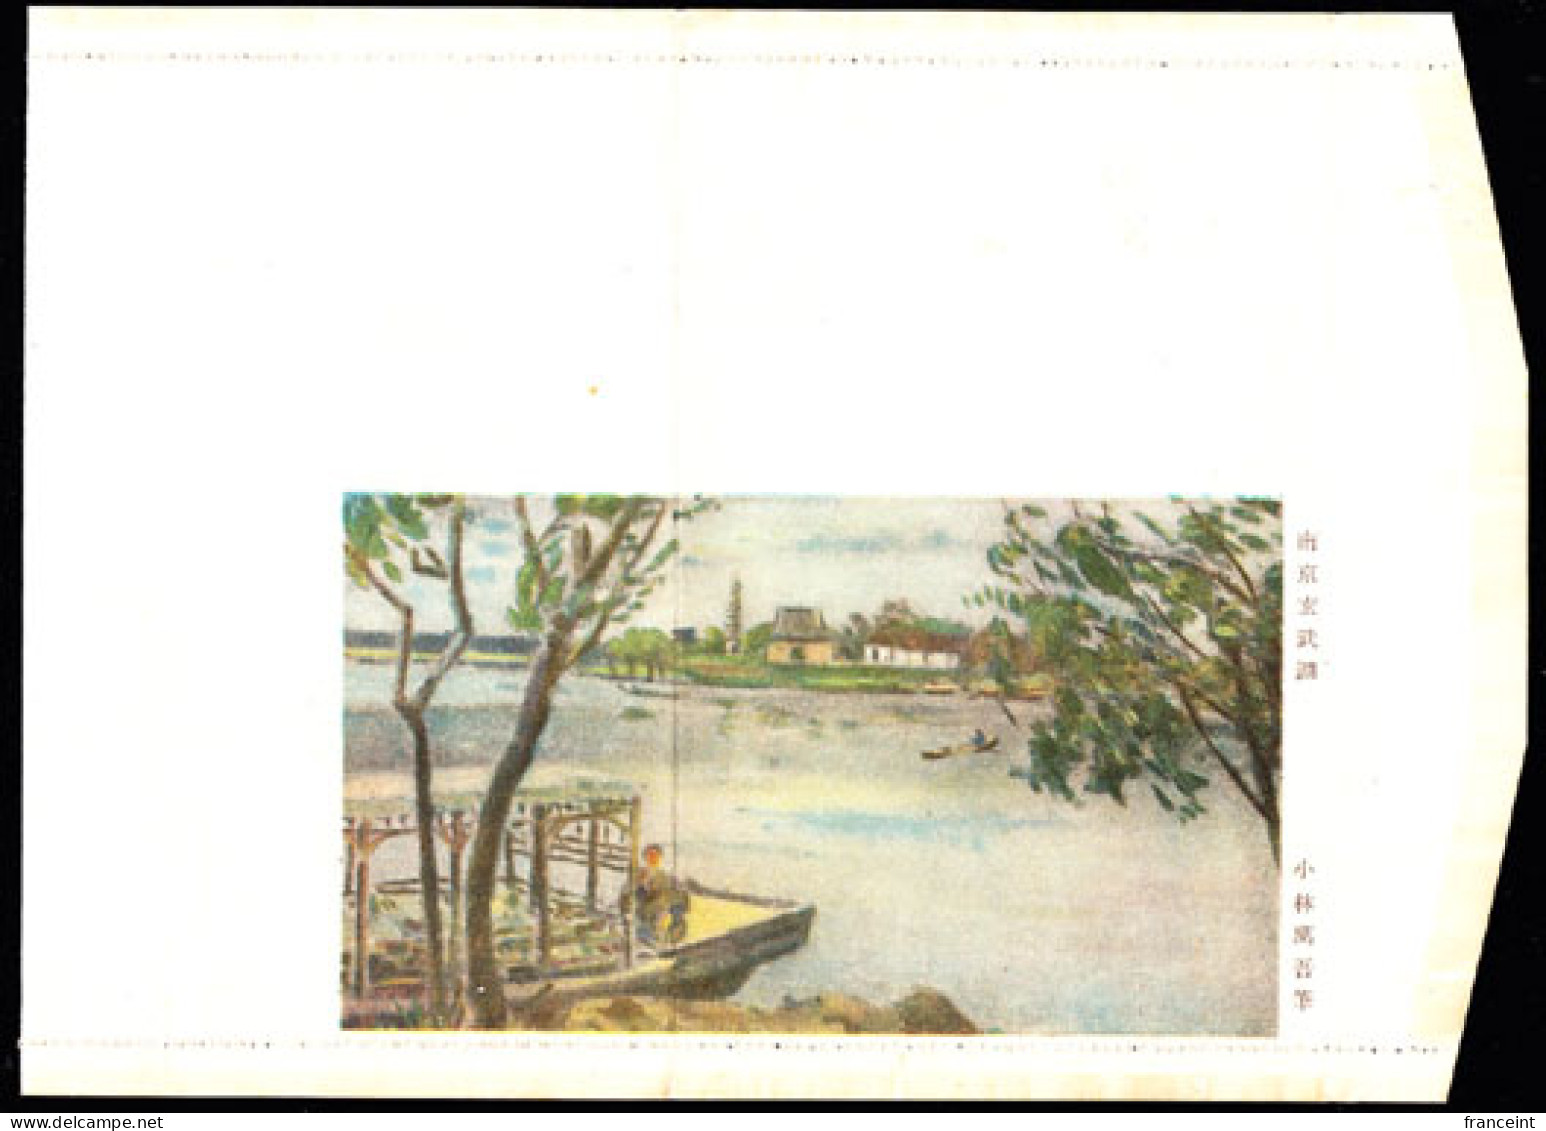 JAPAN (OCCUPATION OF MANCHURIA)(1936) Houseboat On River. Multicolor Illustrated Free Frank Letter Card. - 1932-45 Manchuria (Manchukuo)